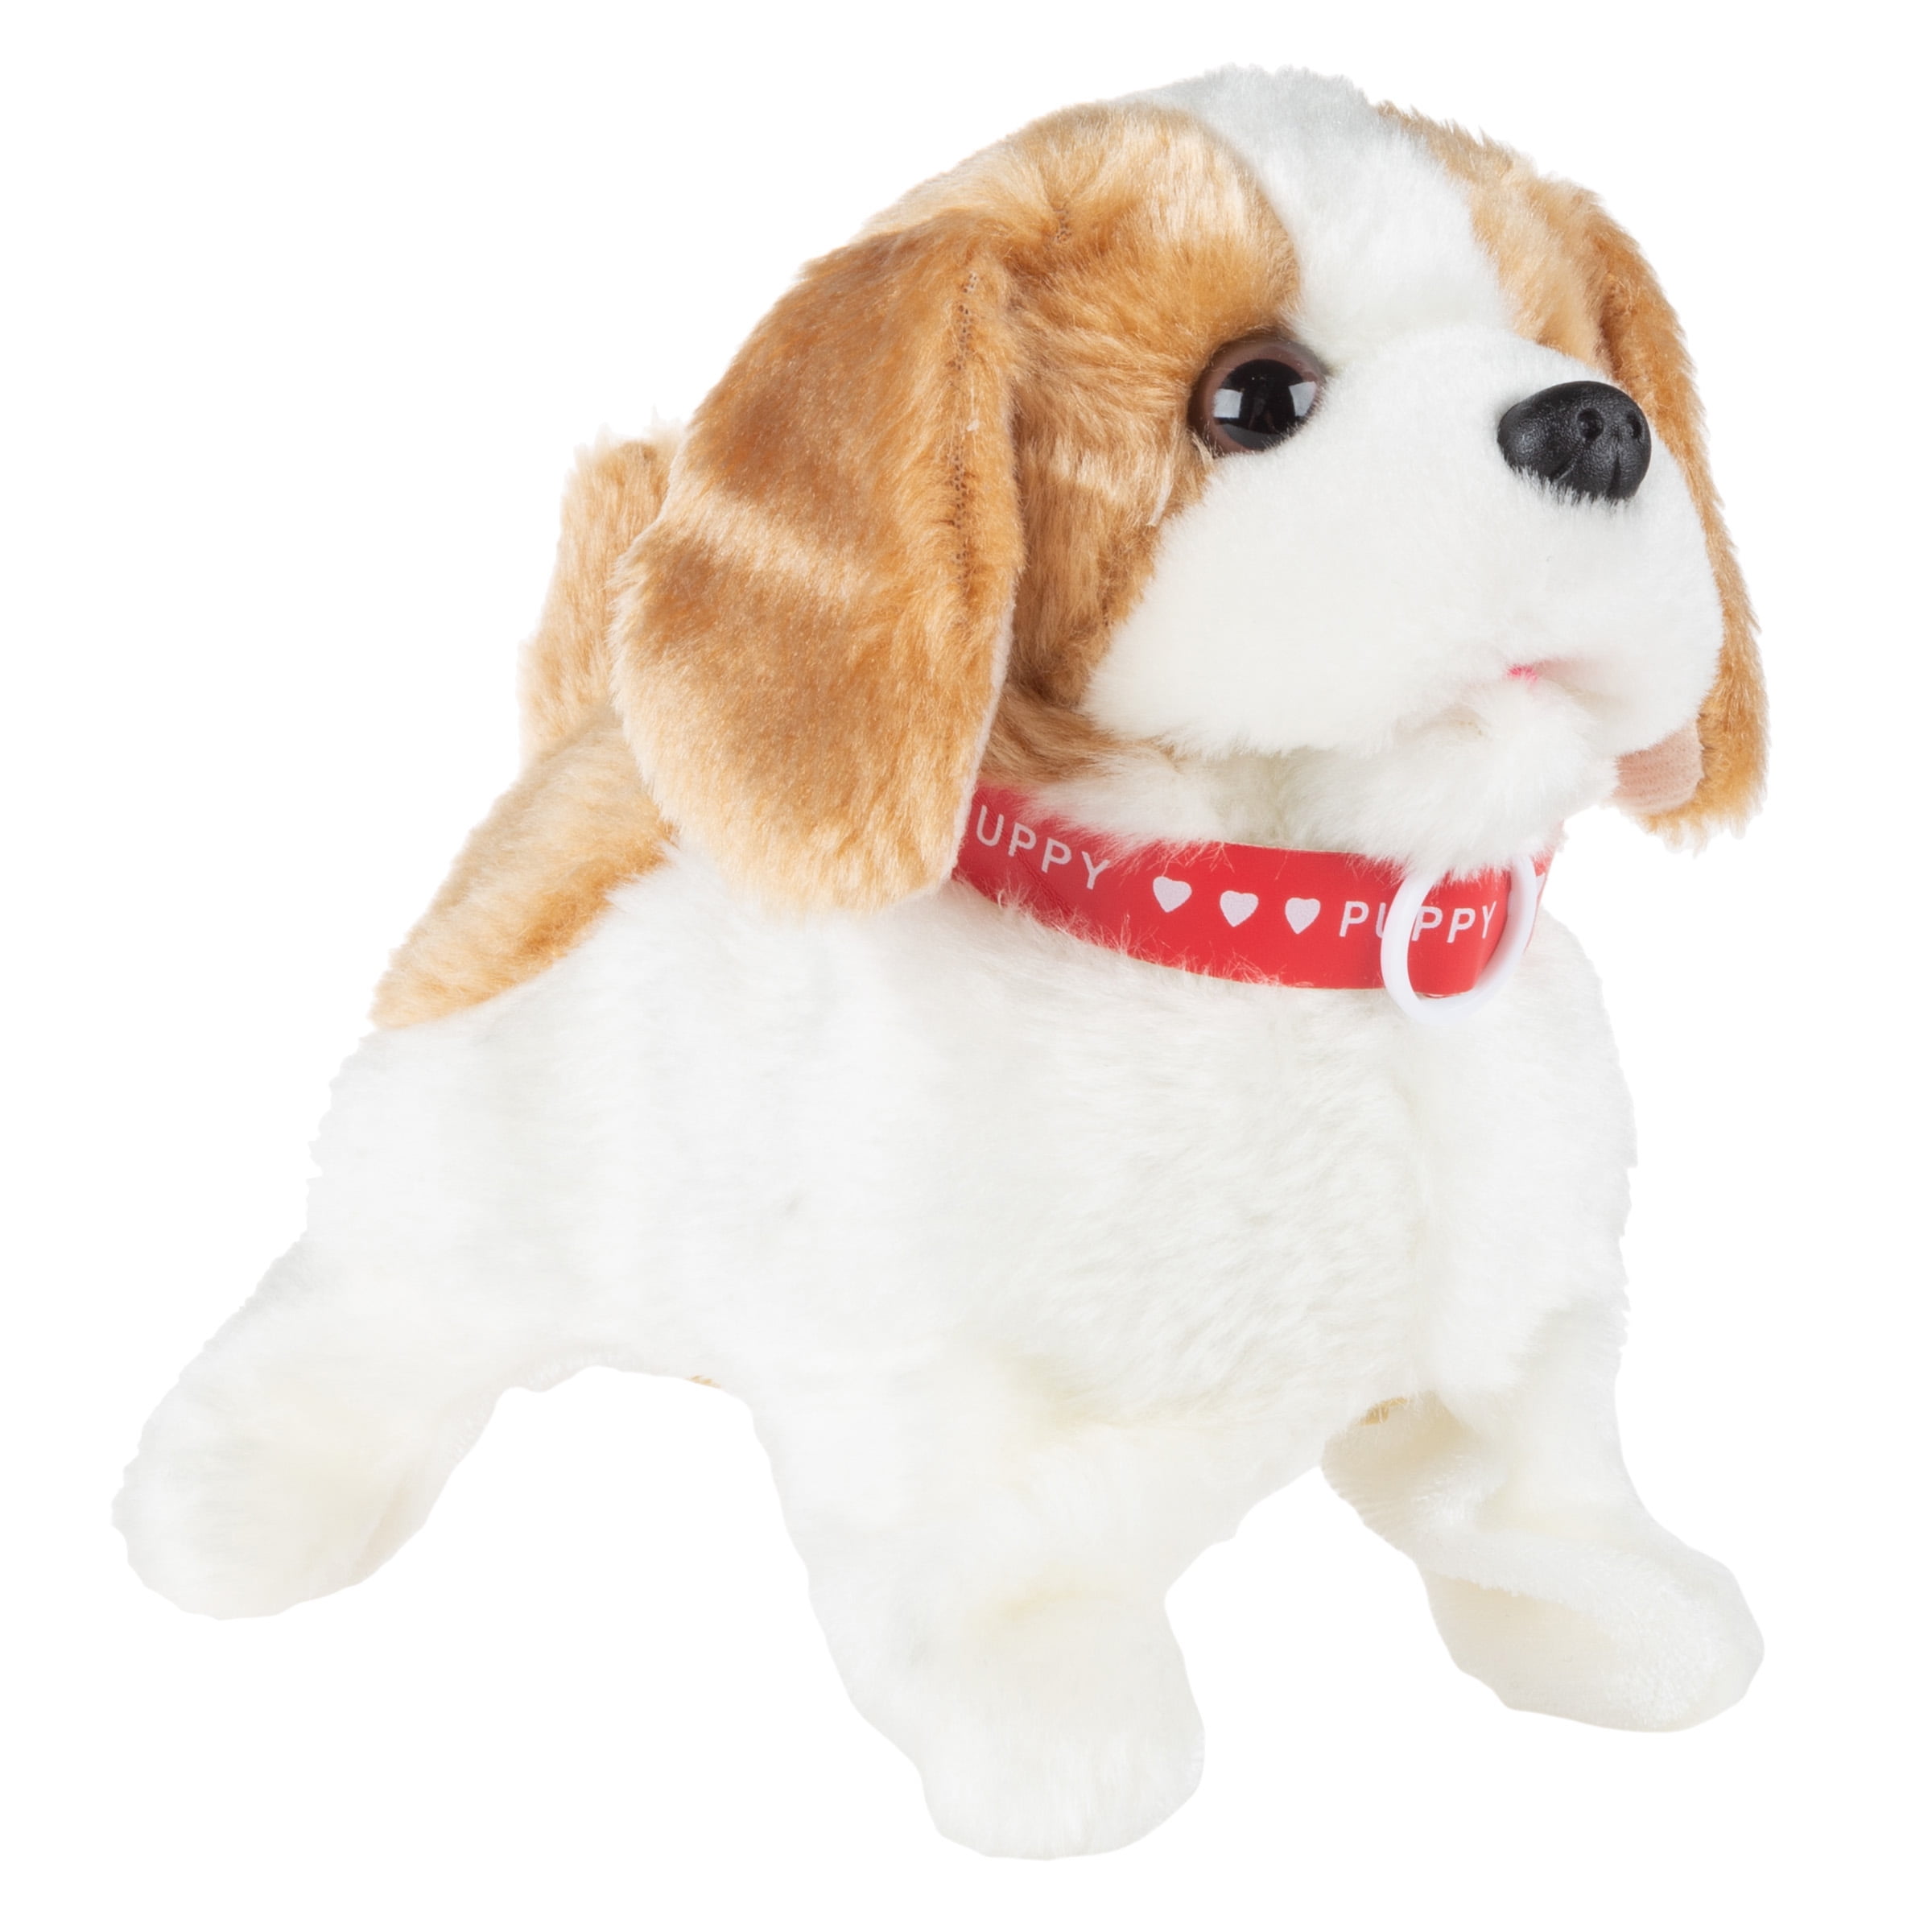 Puppy Dog Battery Operated Sound Barking Walking Wagging Xmas Gift White Brown